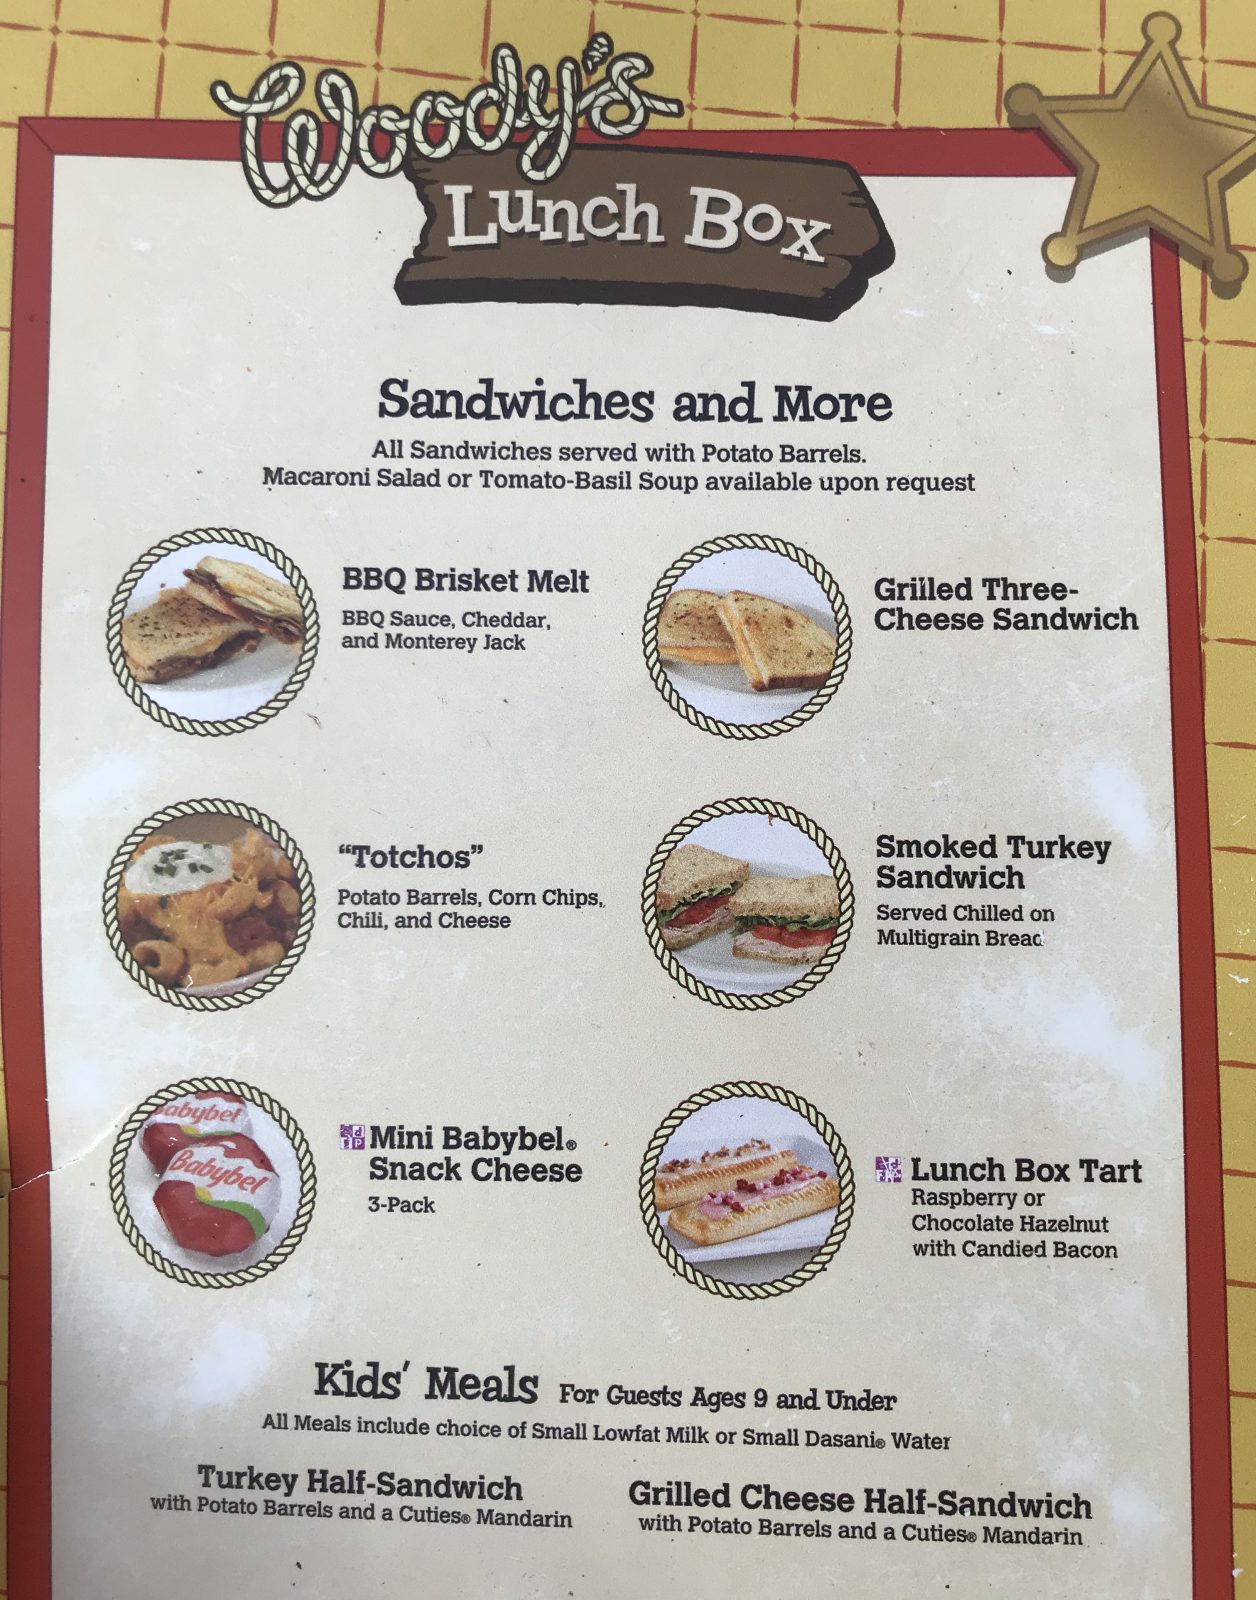 woody's lunch box menu with photos 